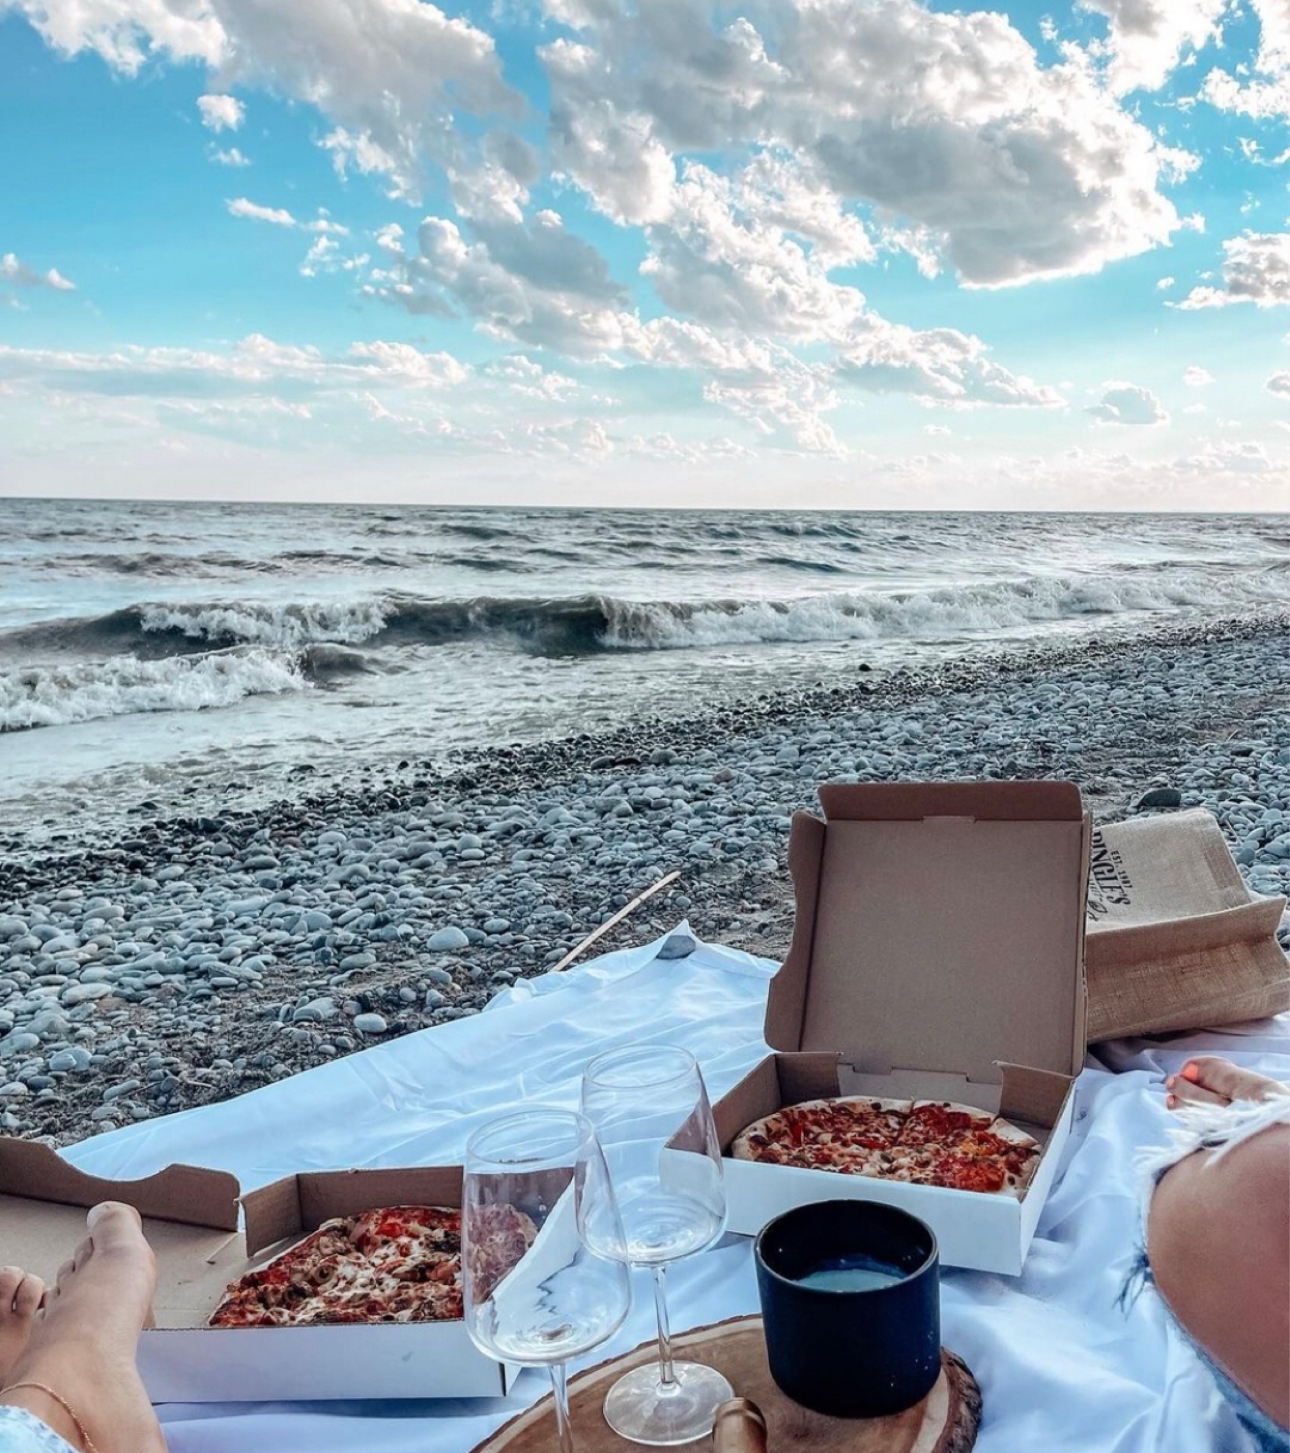 Image of two pizza boxes on a picnic blanket on the beach